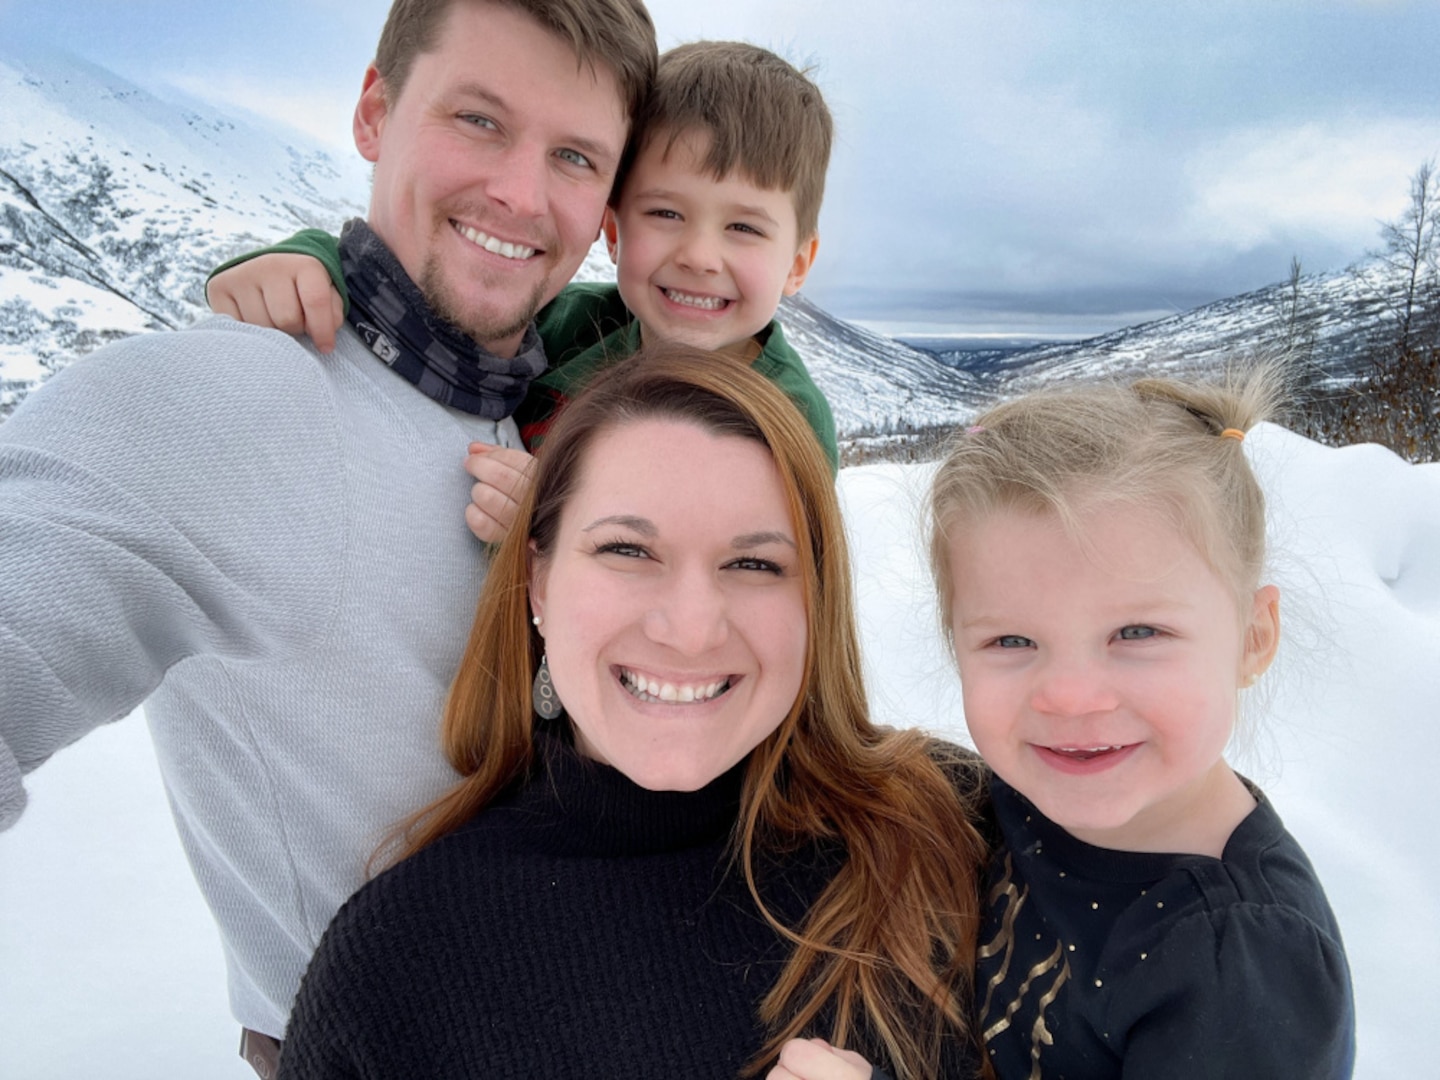 Petty Officer 1st Class Sarah Jacobs shares a moment with her family in Seward, Alaska, where the Jacobs family has enthusiastically embraced numerous outdoor activities. Jacobs credits her husband Brandon for supporting her thriving career. (U.S. Coast Guard photo)